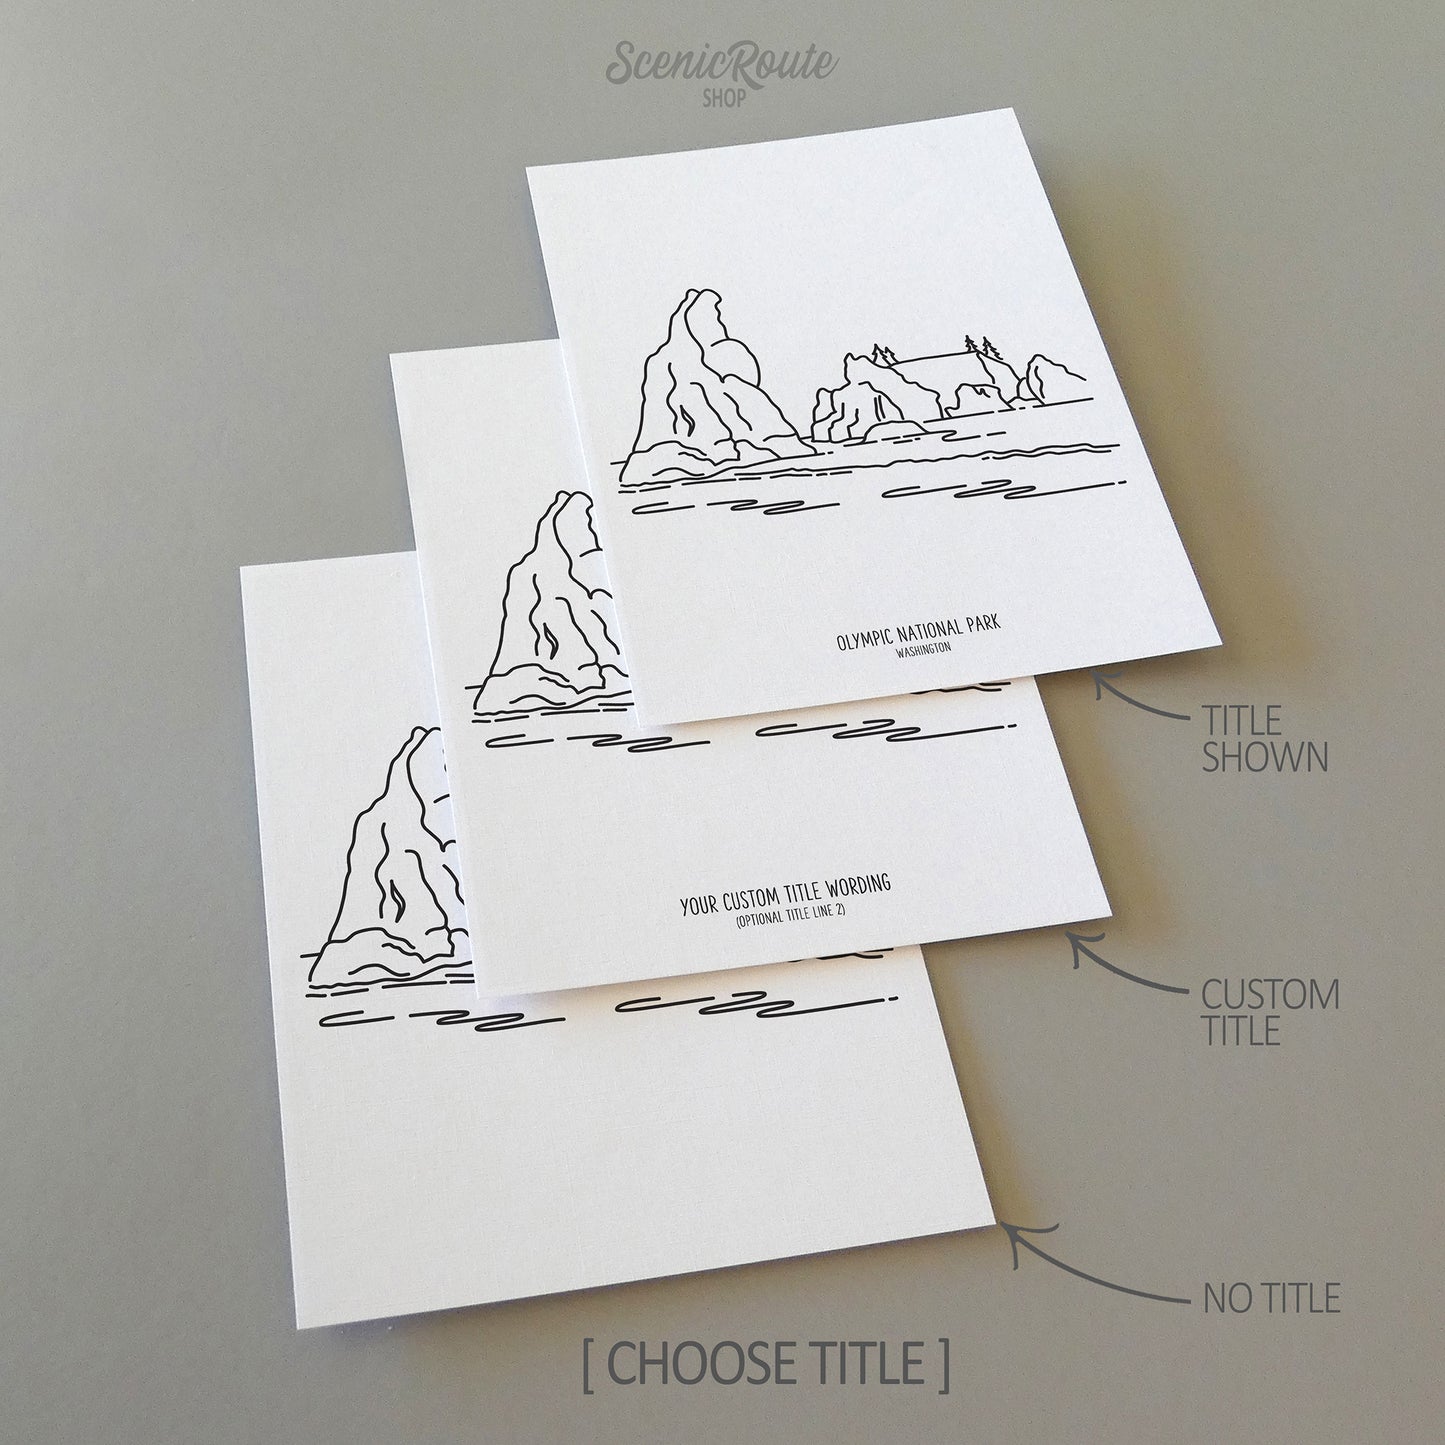 Three line art drawings of Olympic National Park on white linen paper with a gray background. The pieces are shown with title options that can be chosen and personalized.